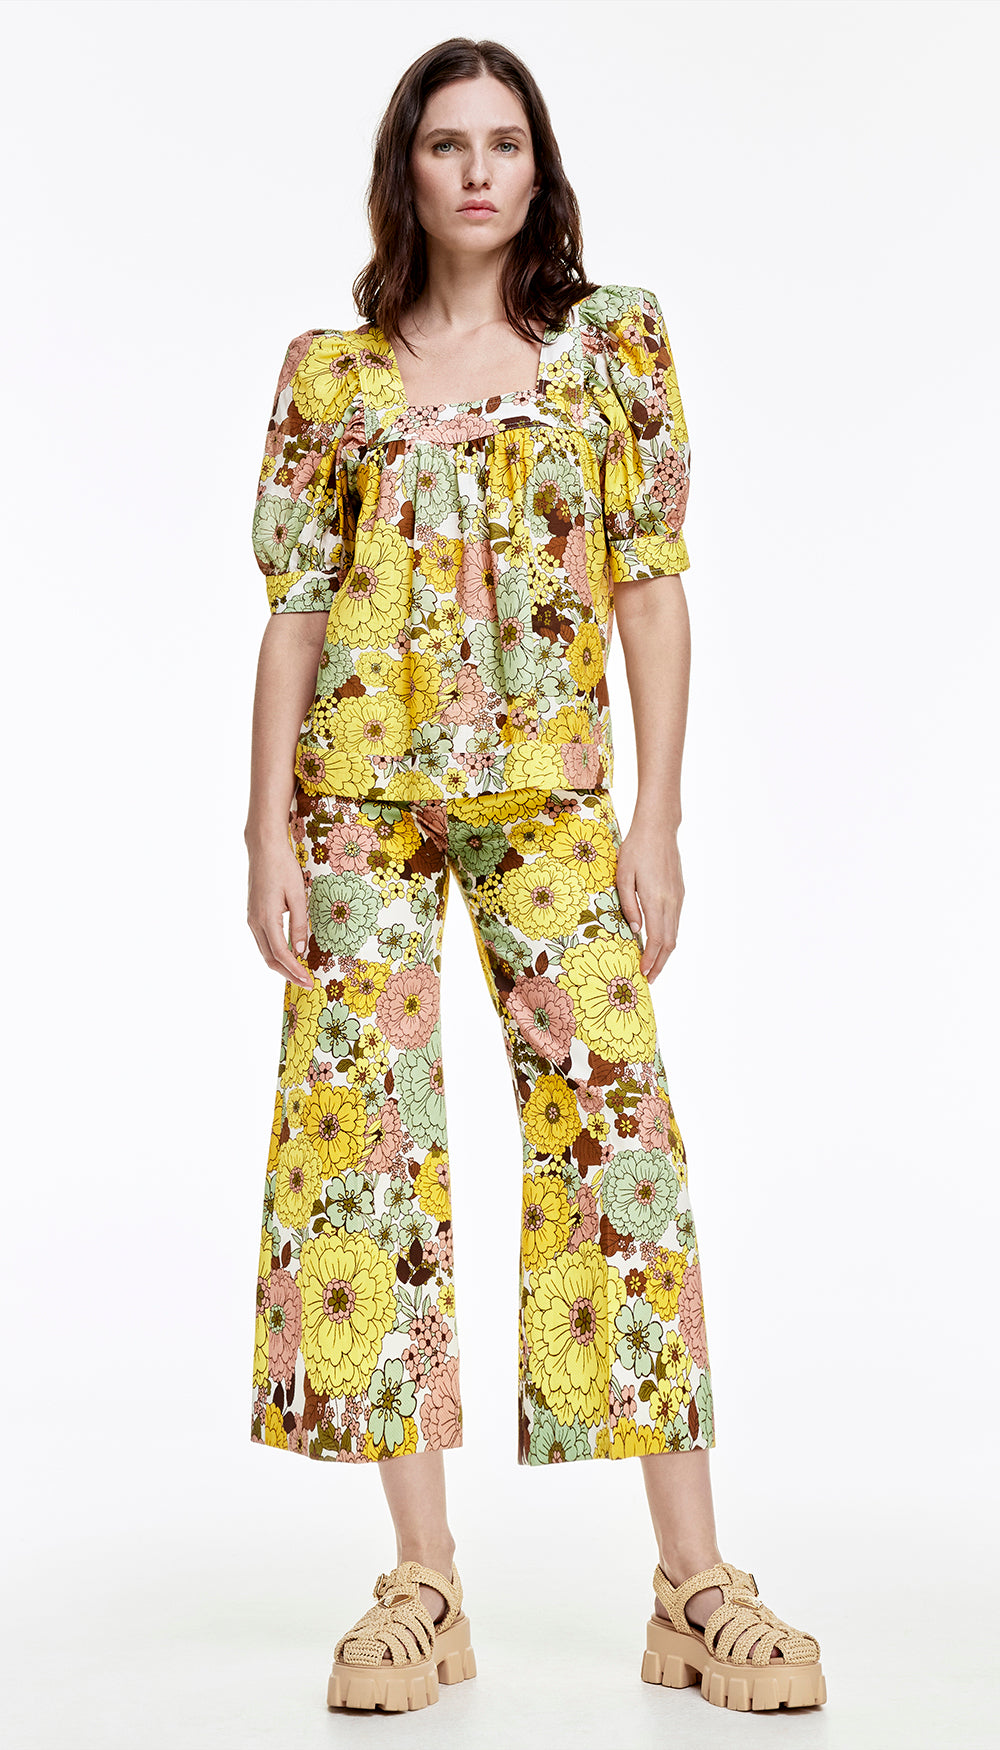 A woman in a yellow floral print blouse and pant.